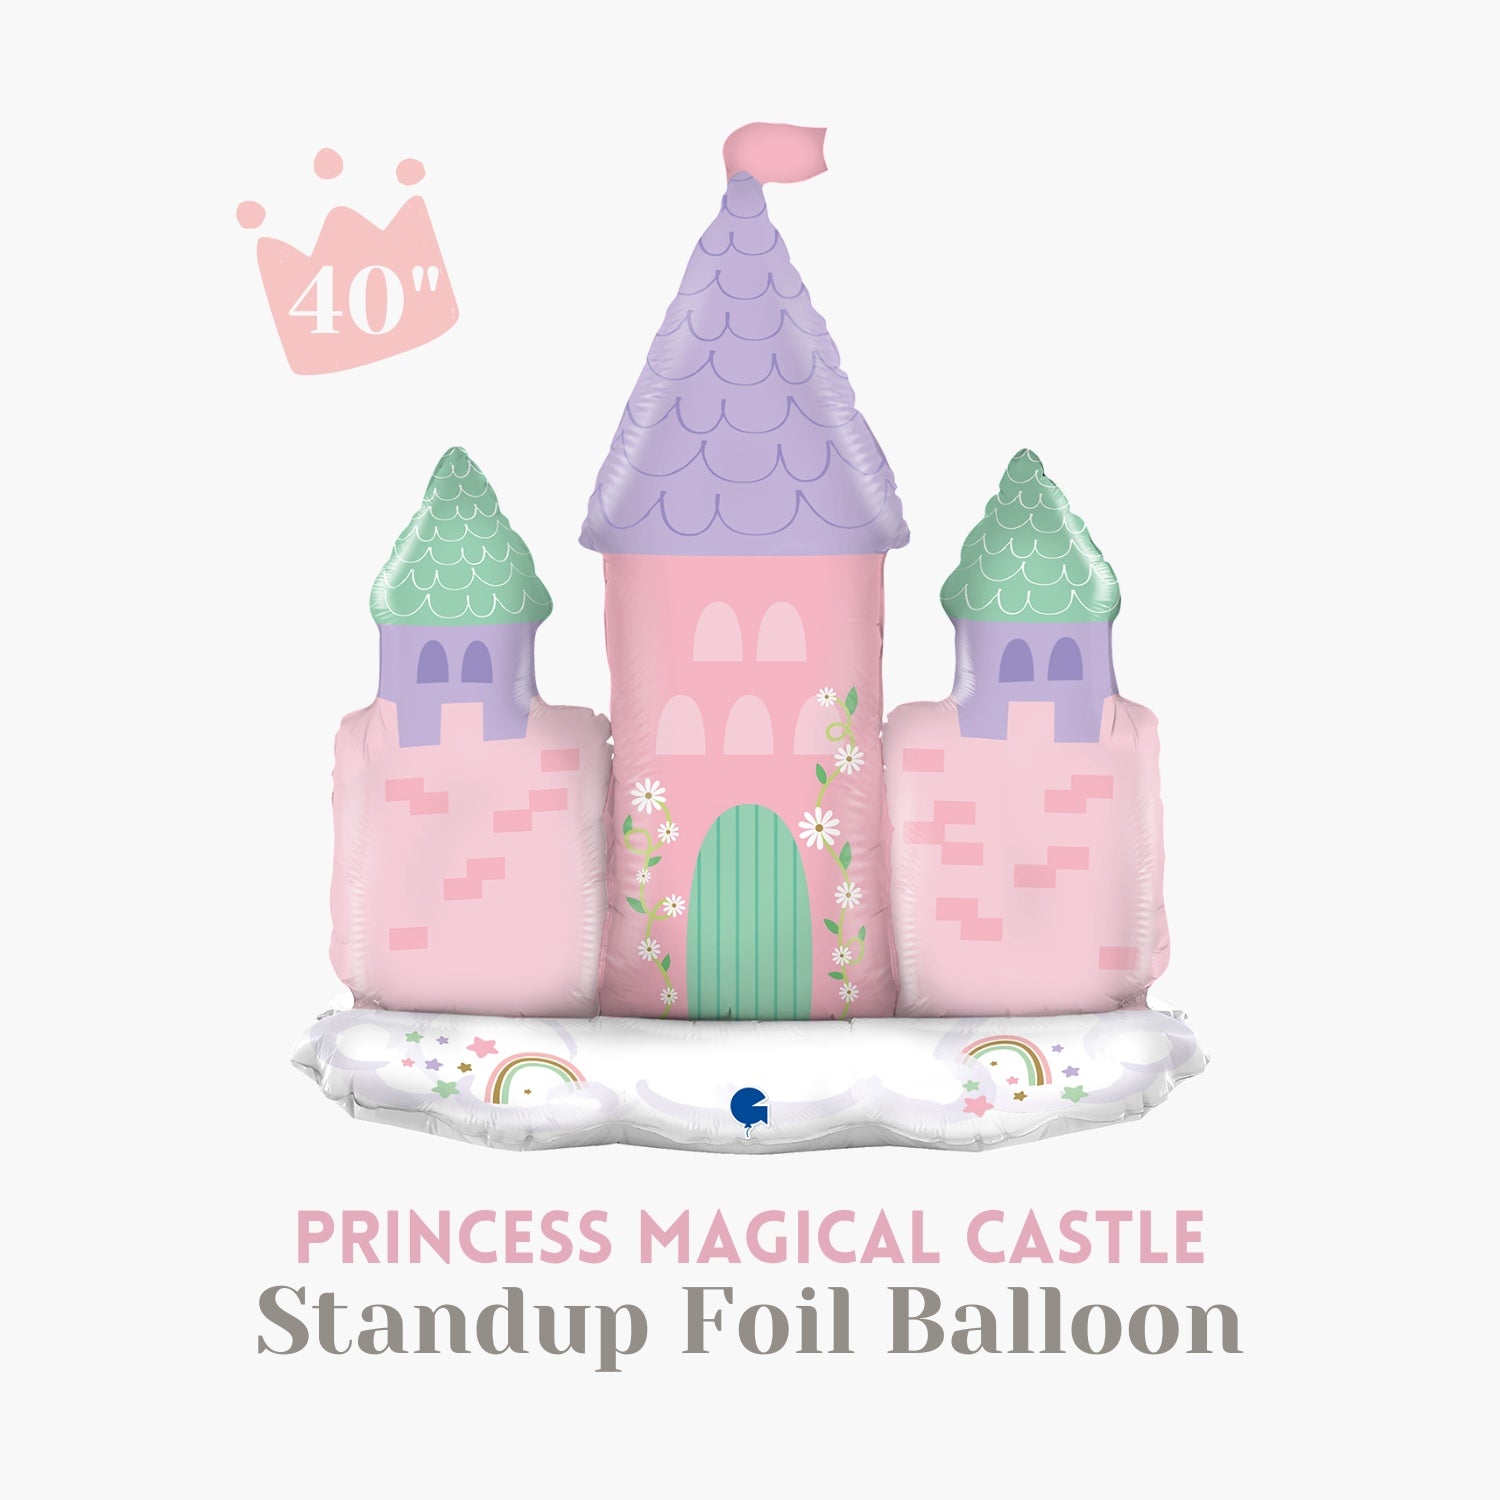 Princess Magical Castle Standup Foil Balloon 40" - Girls Princess Birthday Party Decorations